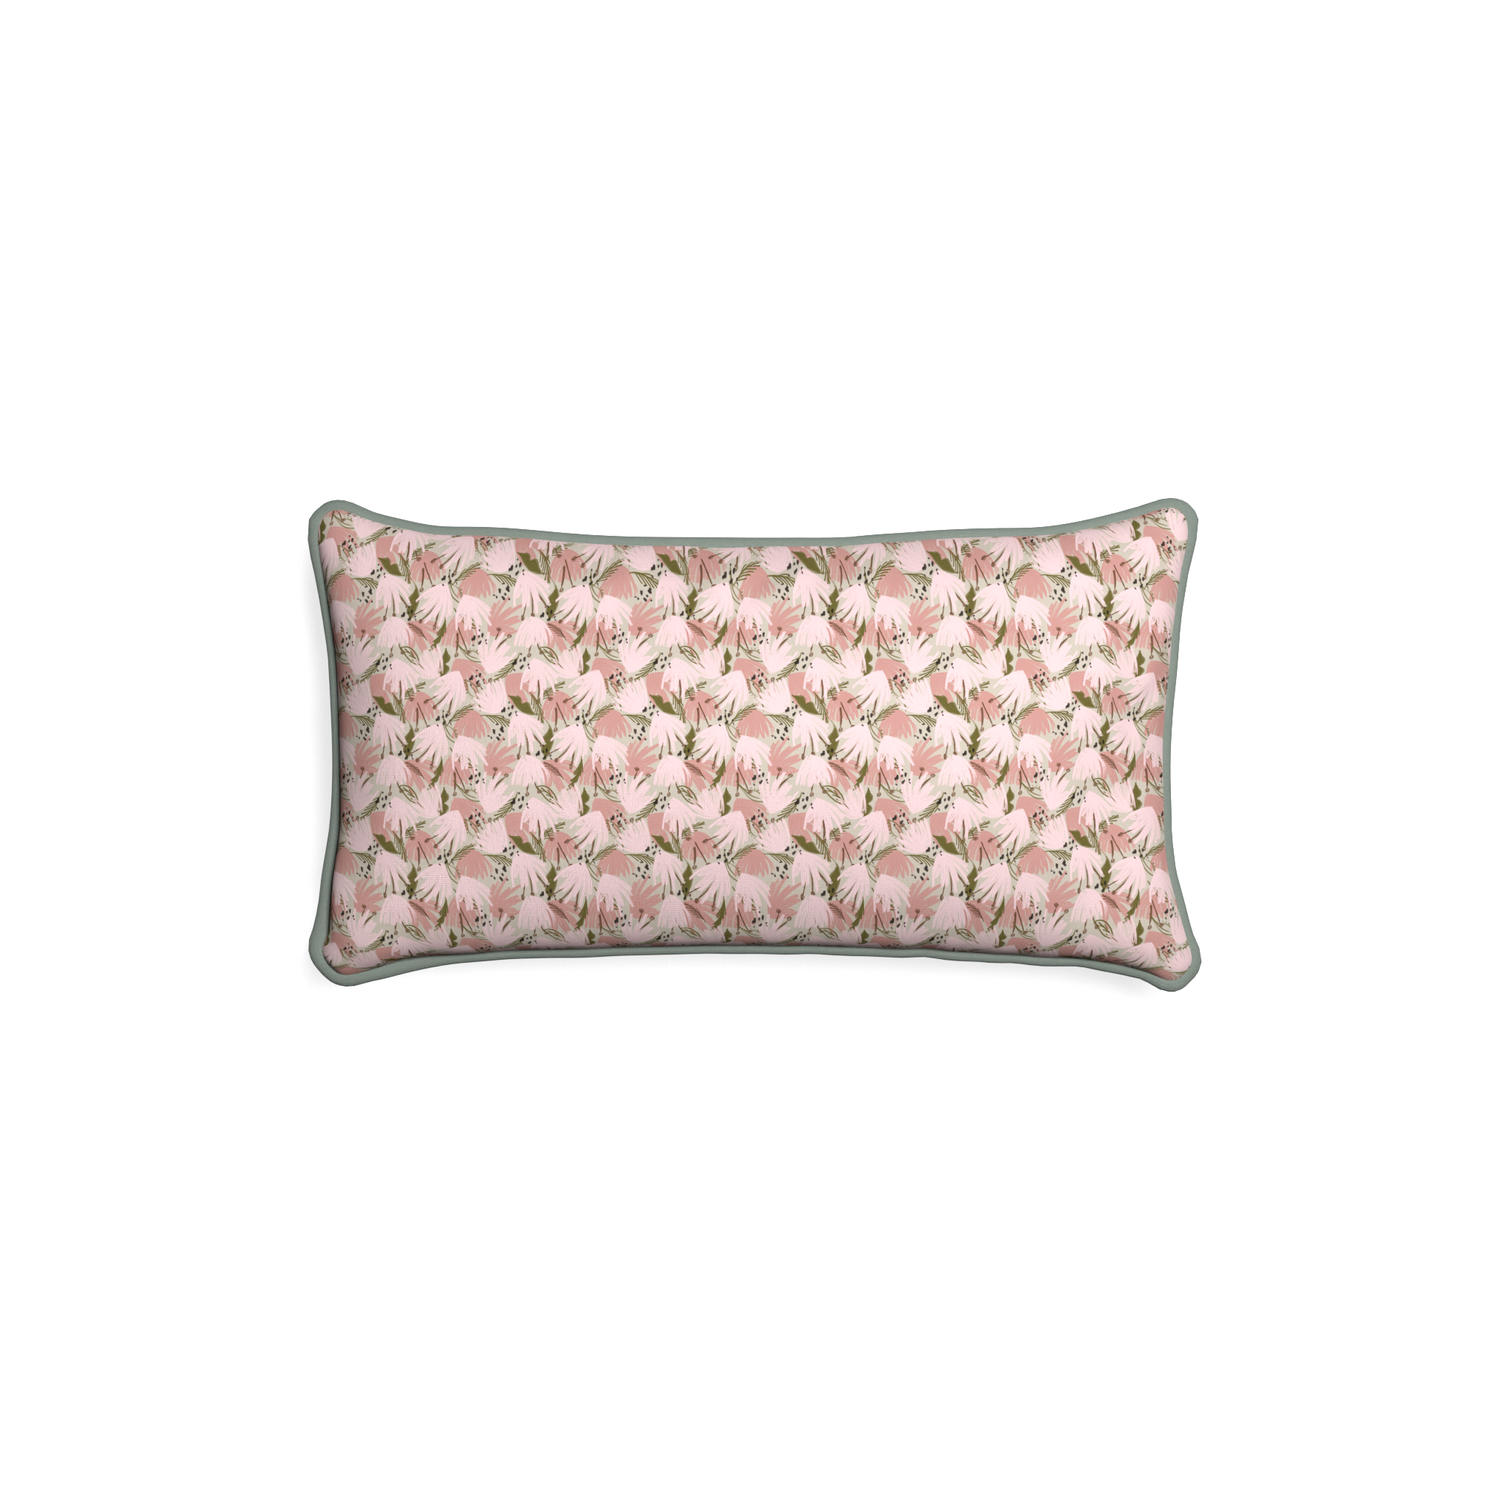 Petite-lumbar eden pink custom pink floralpillow with sage piping on white background